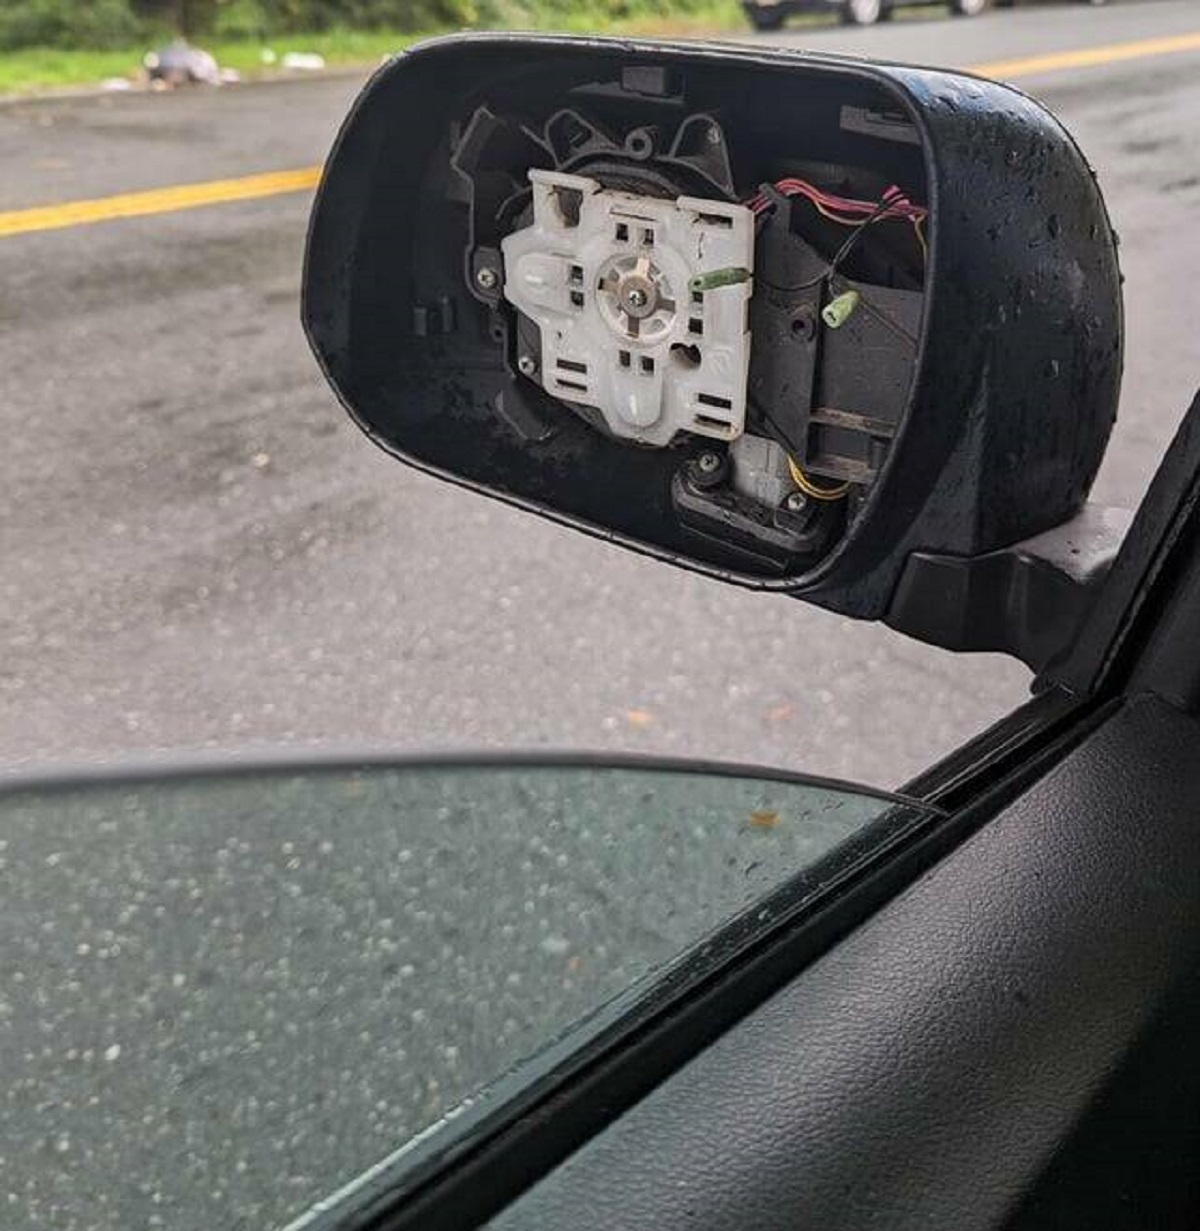 "Came home from vacation to my side view mirrors being stolen."